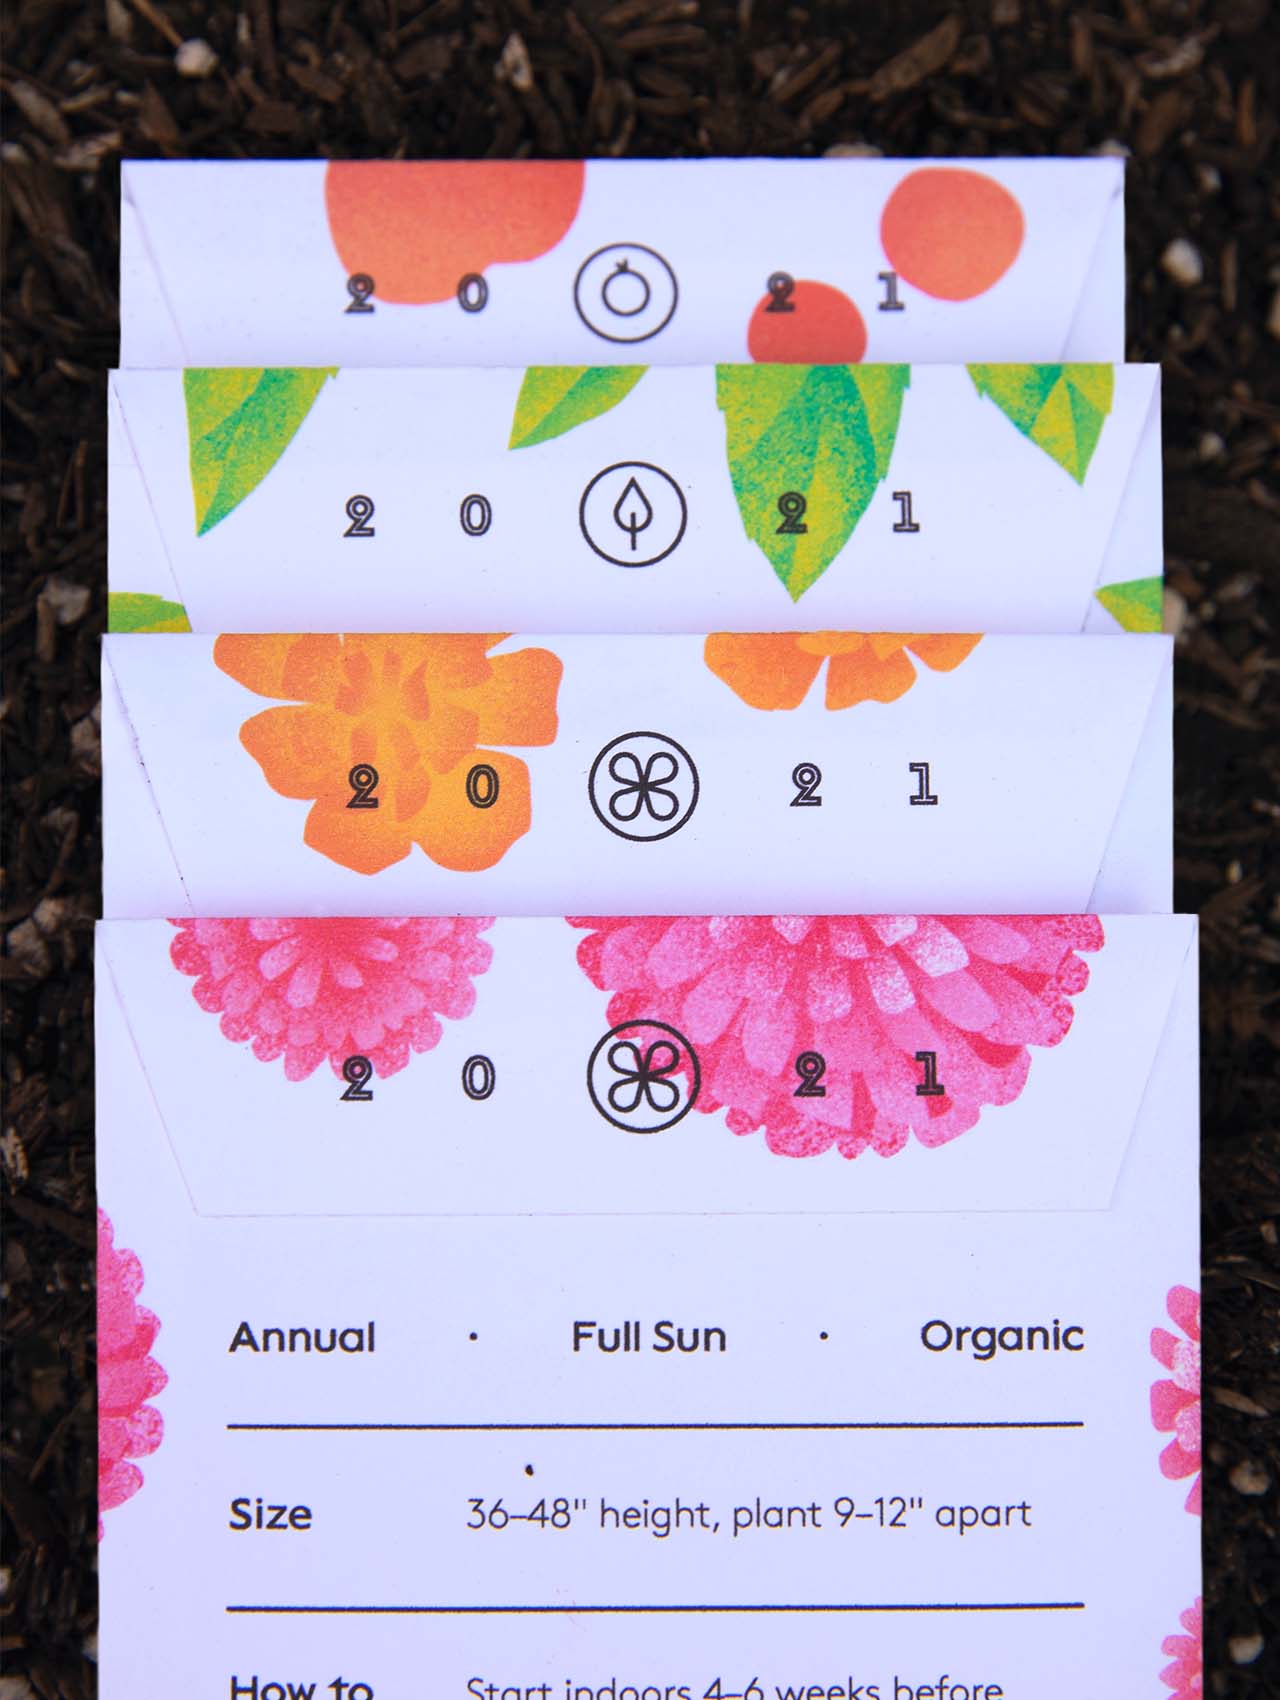 Seed Packet Details